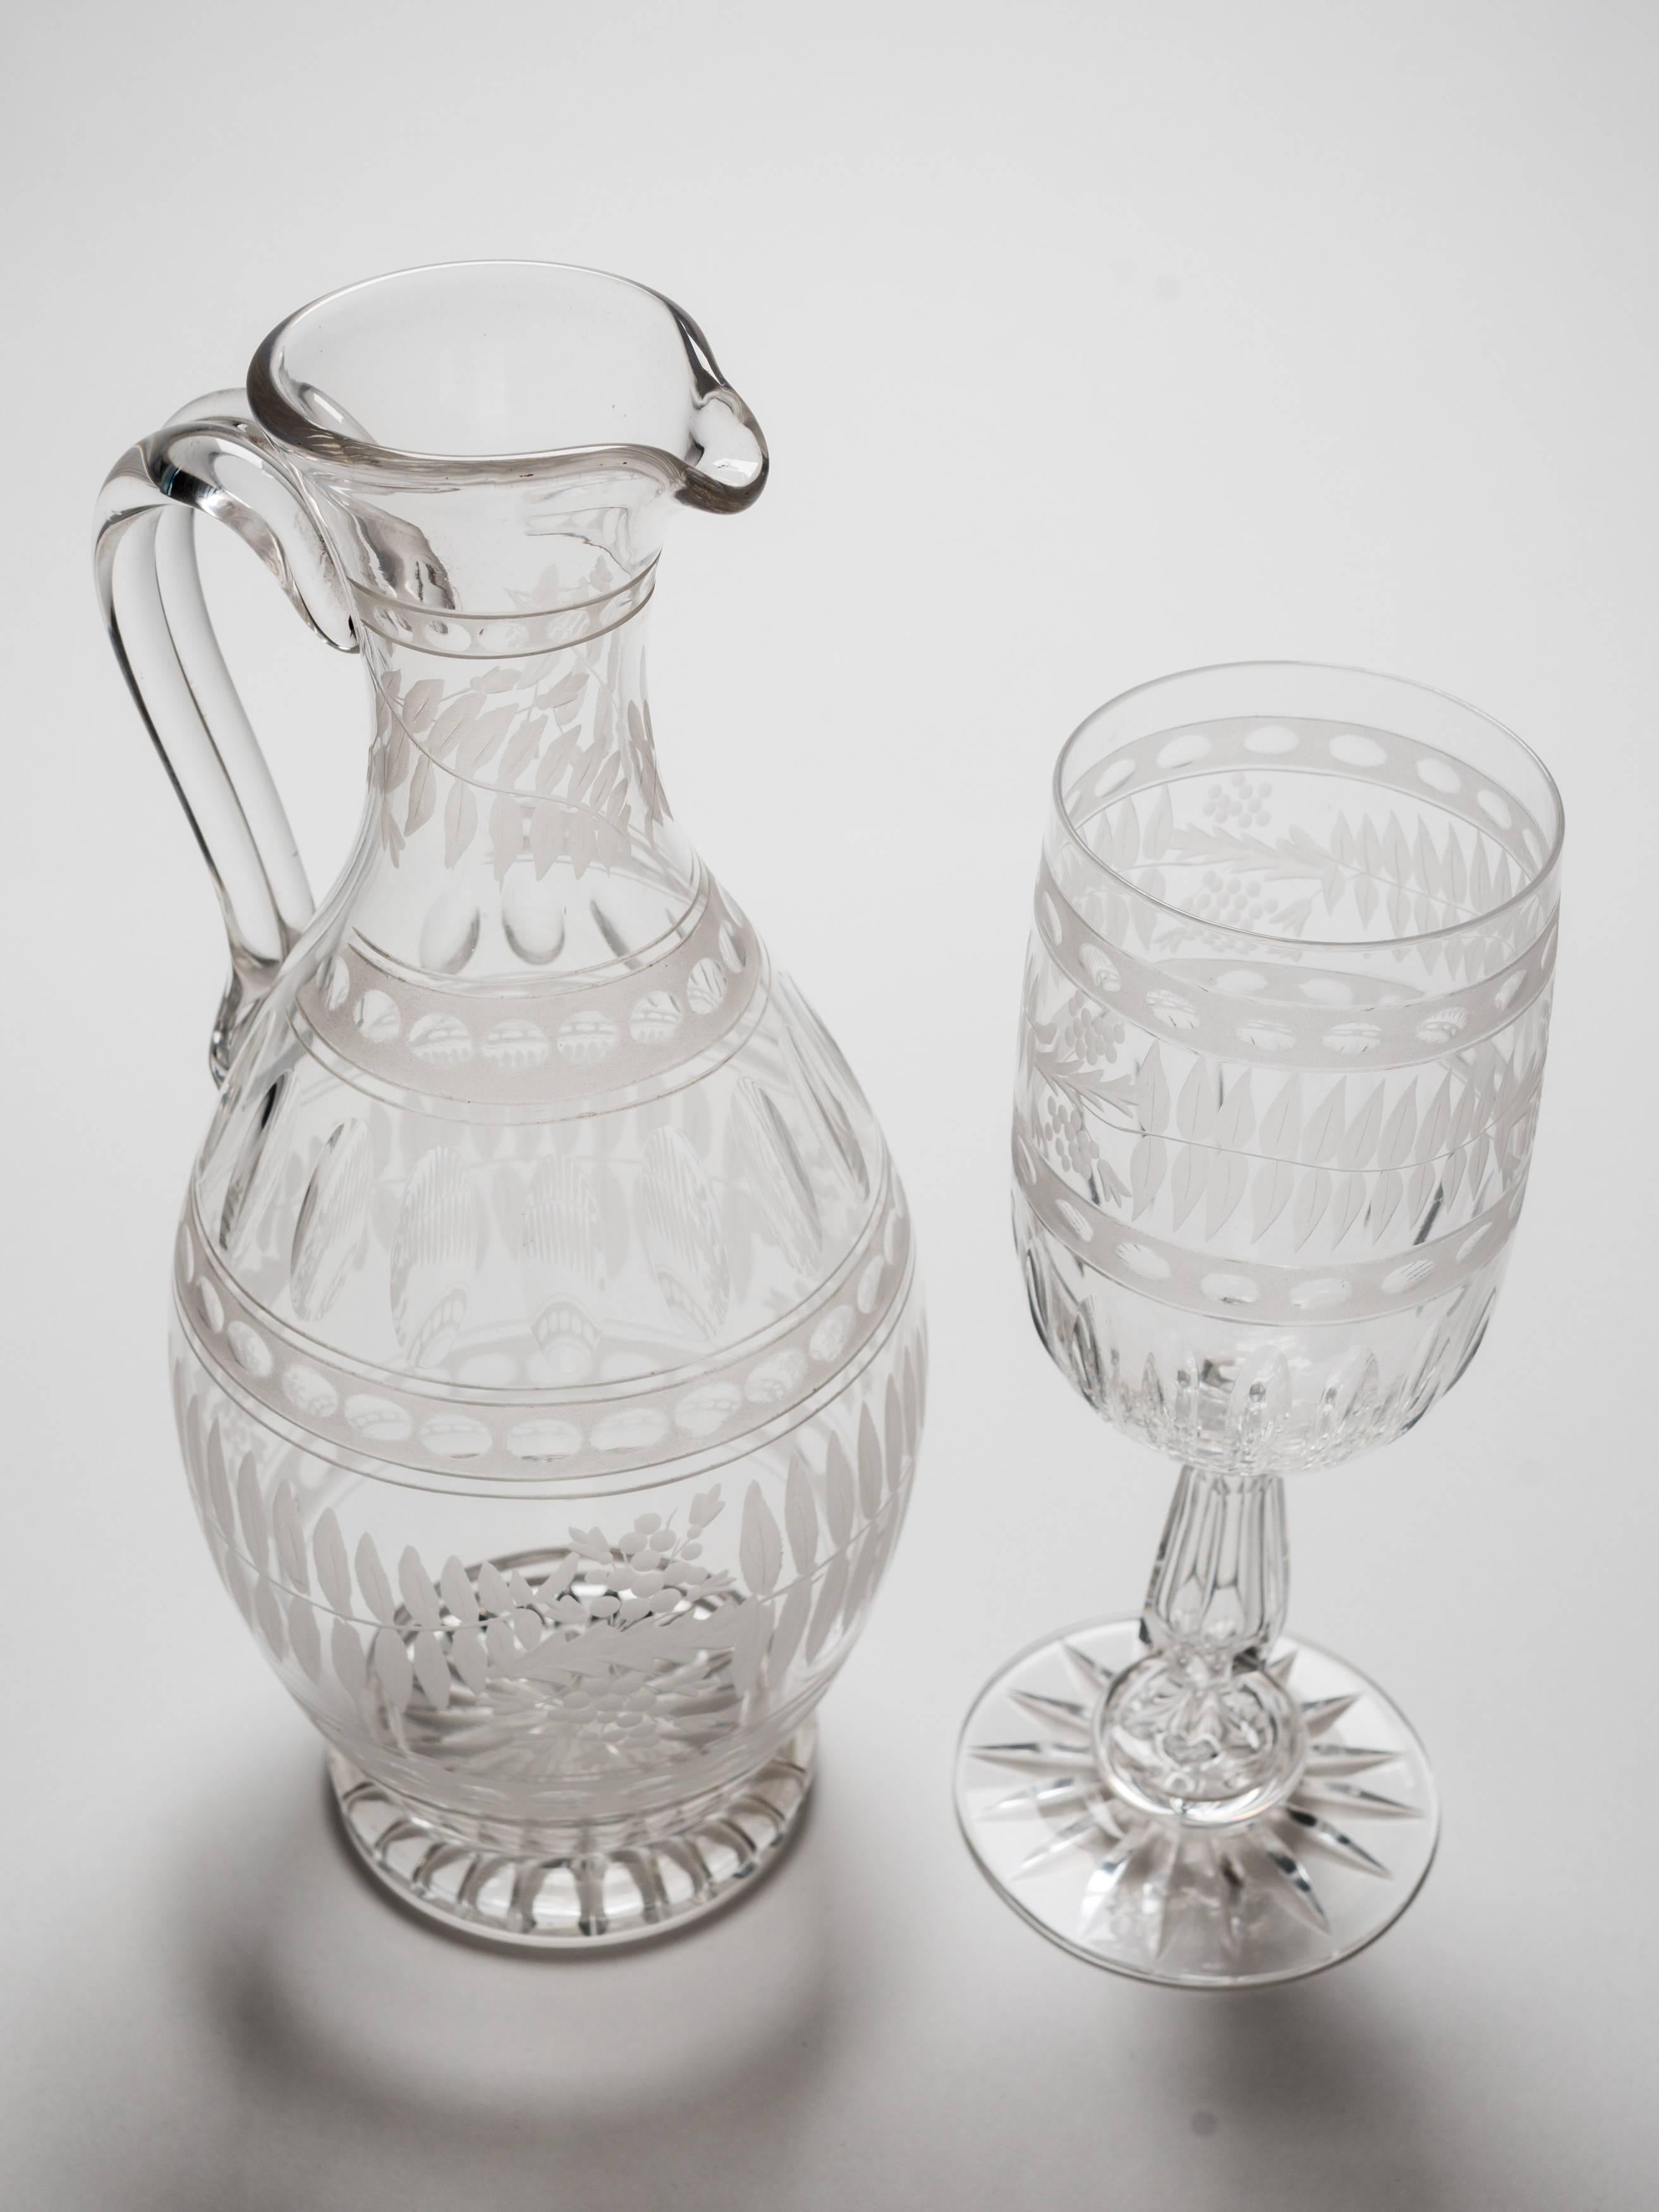 A beautiful English Victorian cut-glass claret jug and goblet, both with lovely etched decoration and star cut bases. The jug has a strap handle and the goblet has a hollow stem, circa 1890.

Measurements:
Claret jug height: 10 1/2